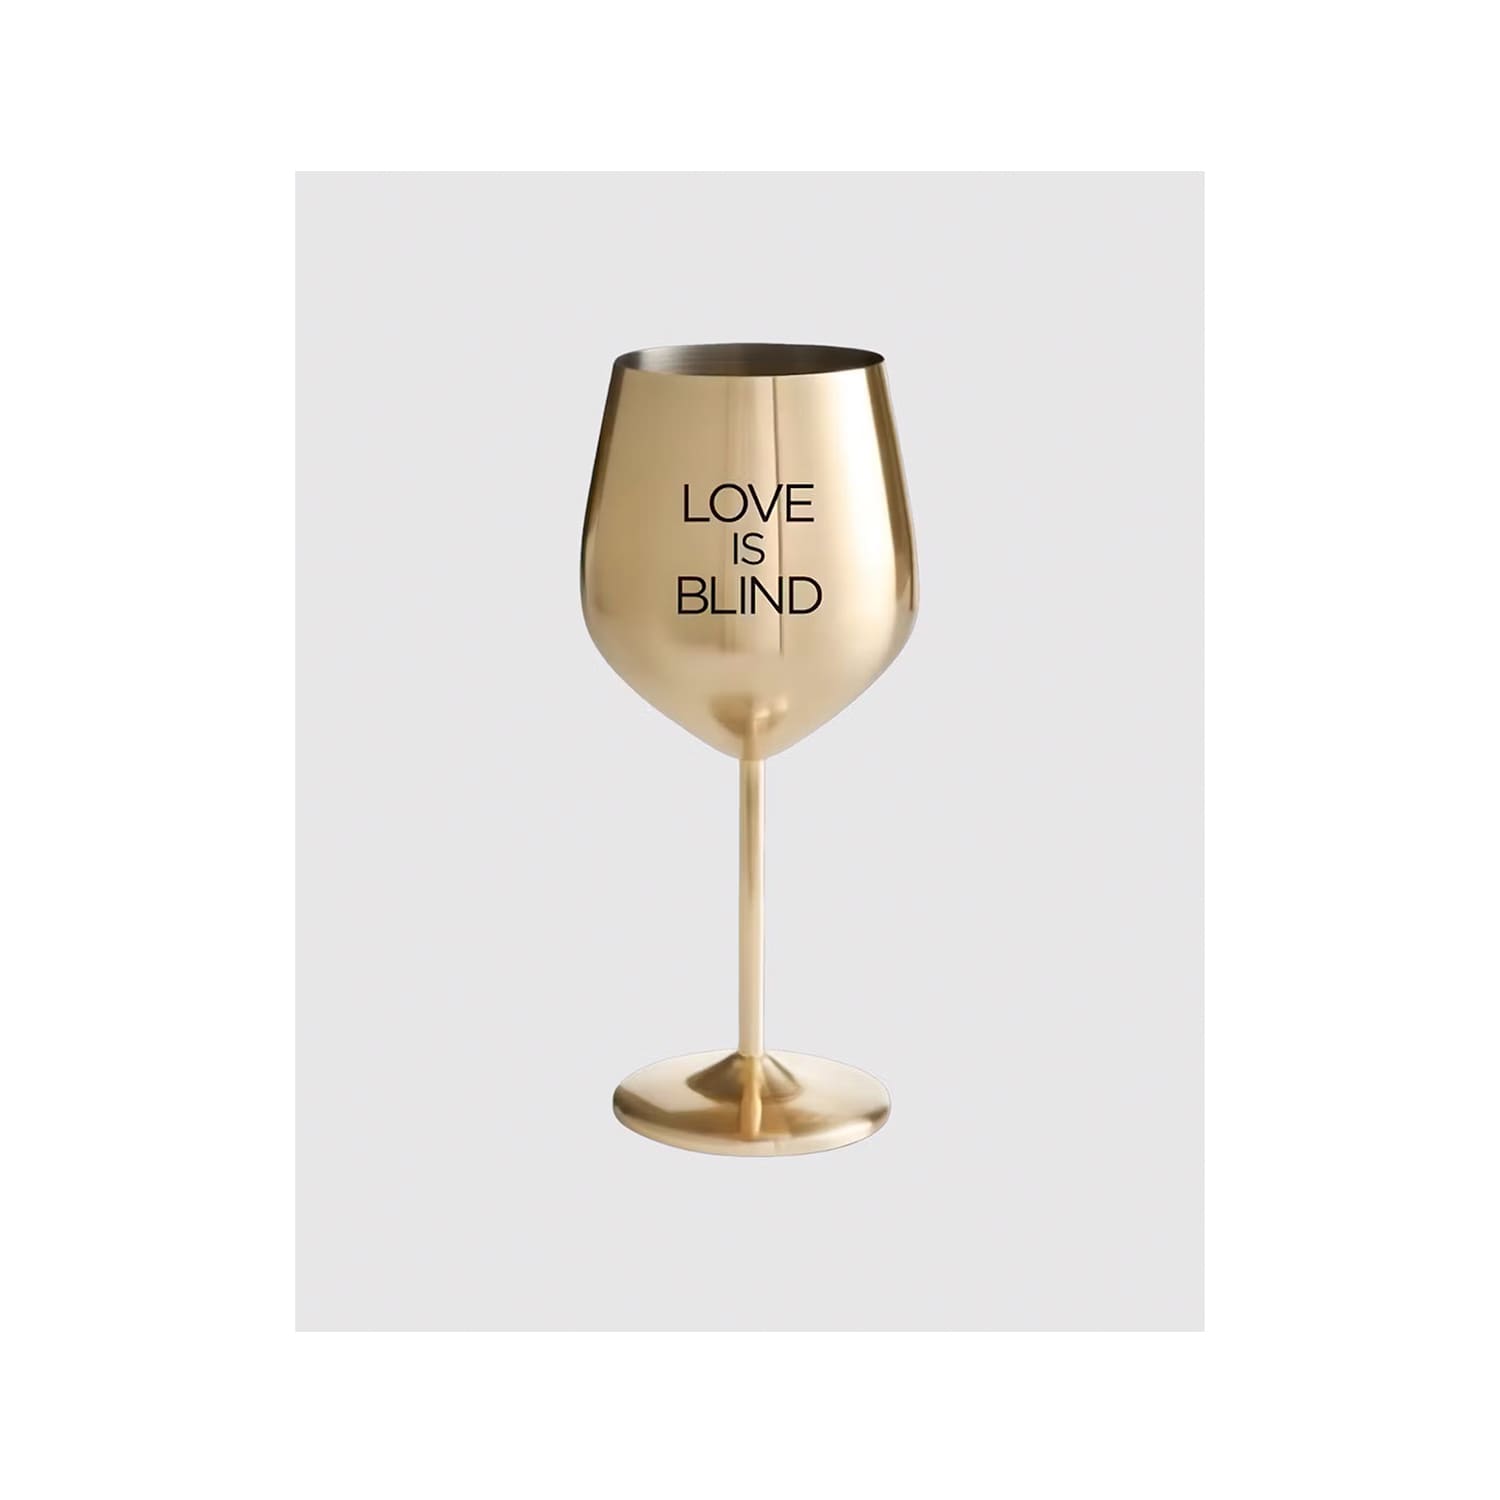 The Gold Wine Glasses From 'Love Is Blind' Are Only $25